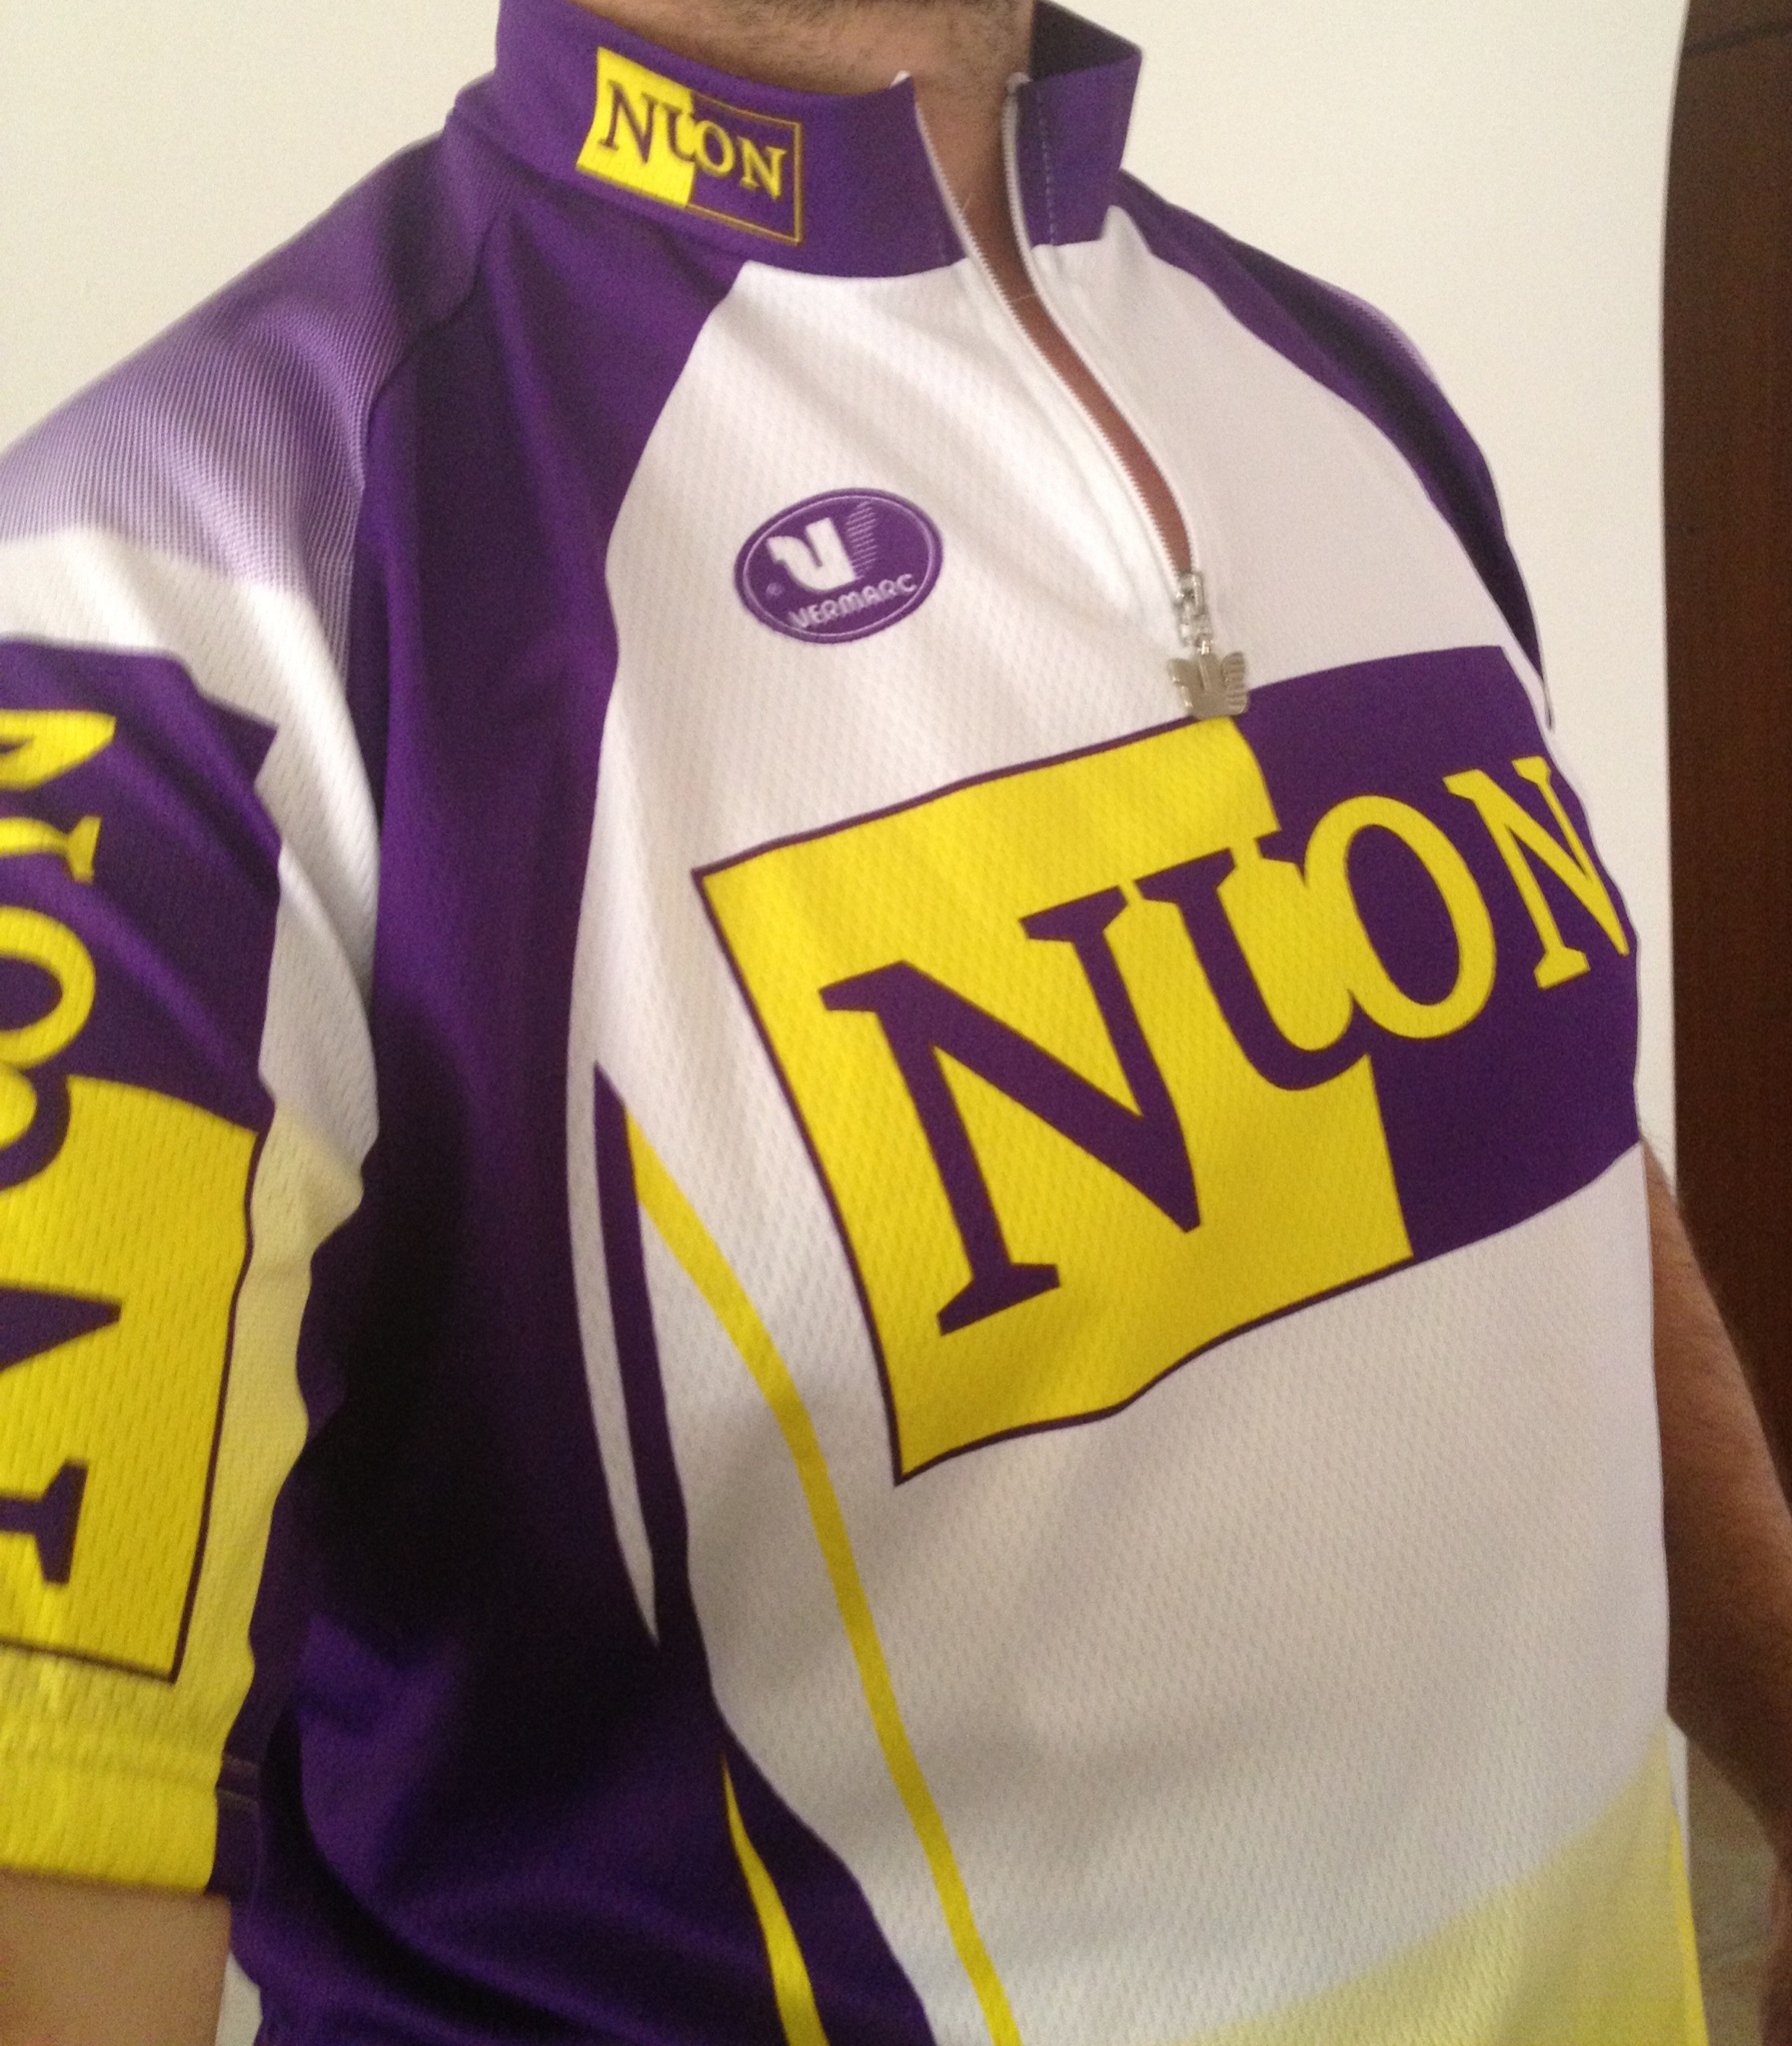 NUON Bicycle Jersey.JPG